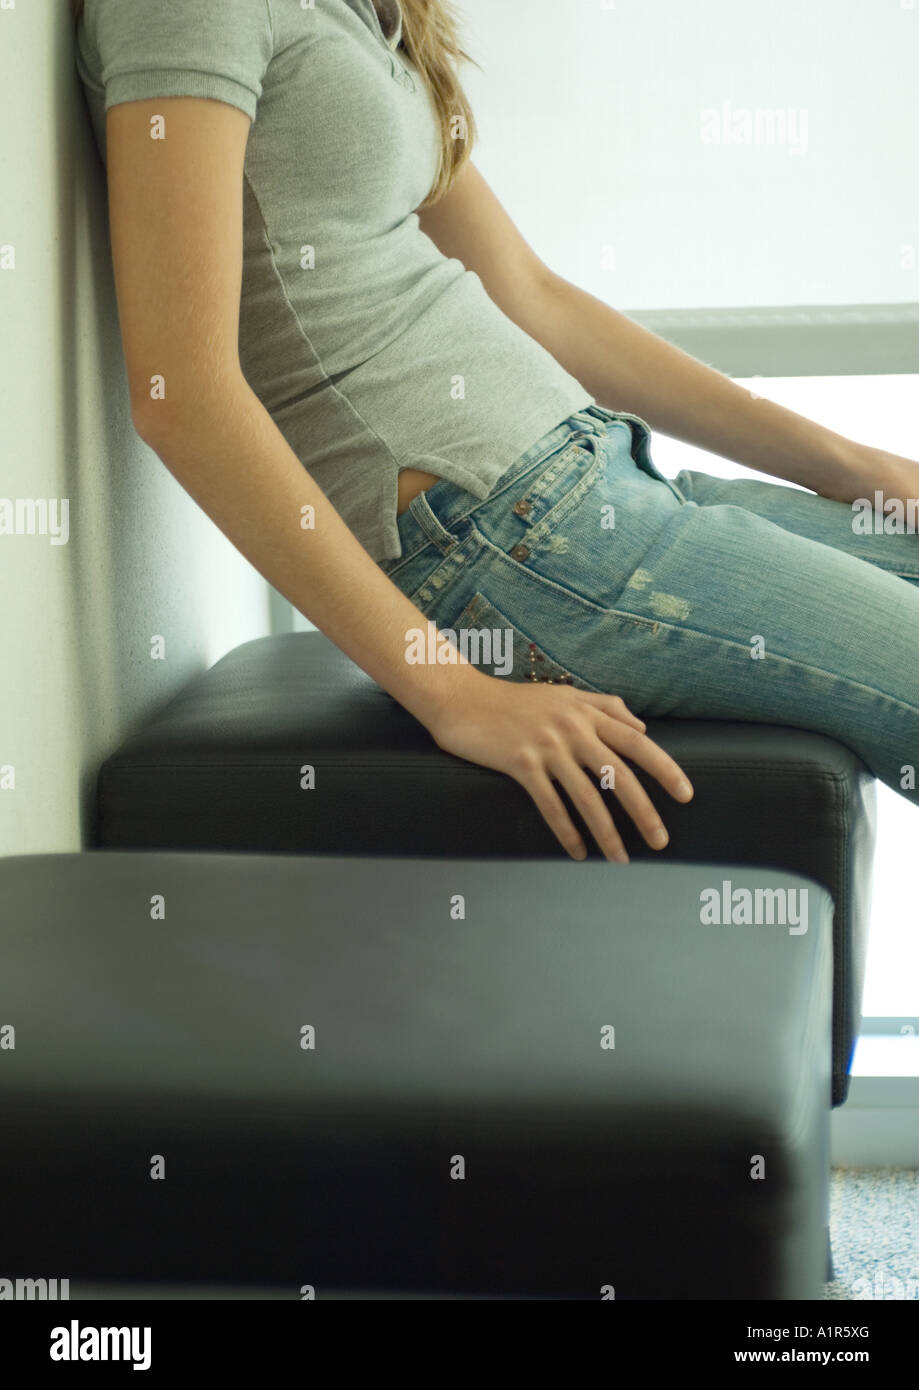 Young woman sitting on bench, mid section Stock Photo